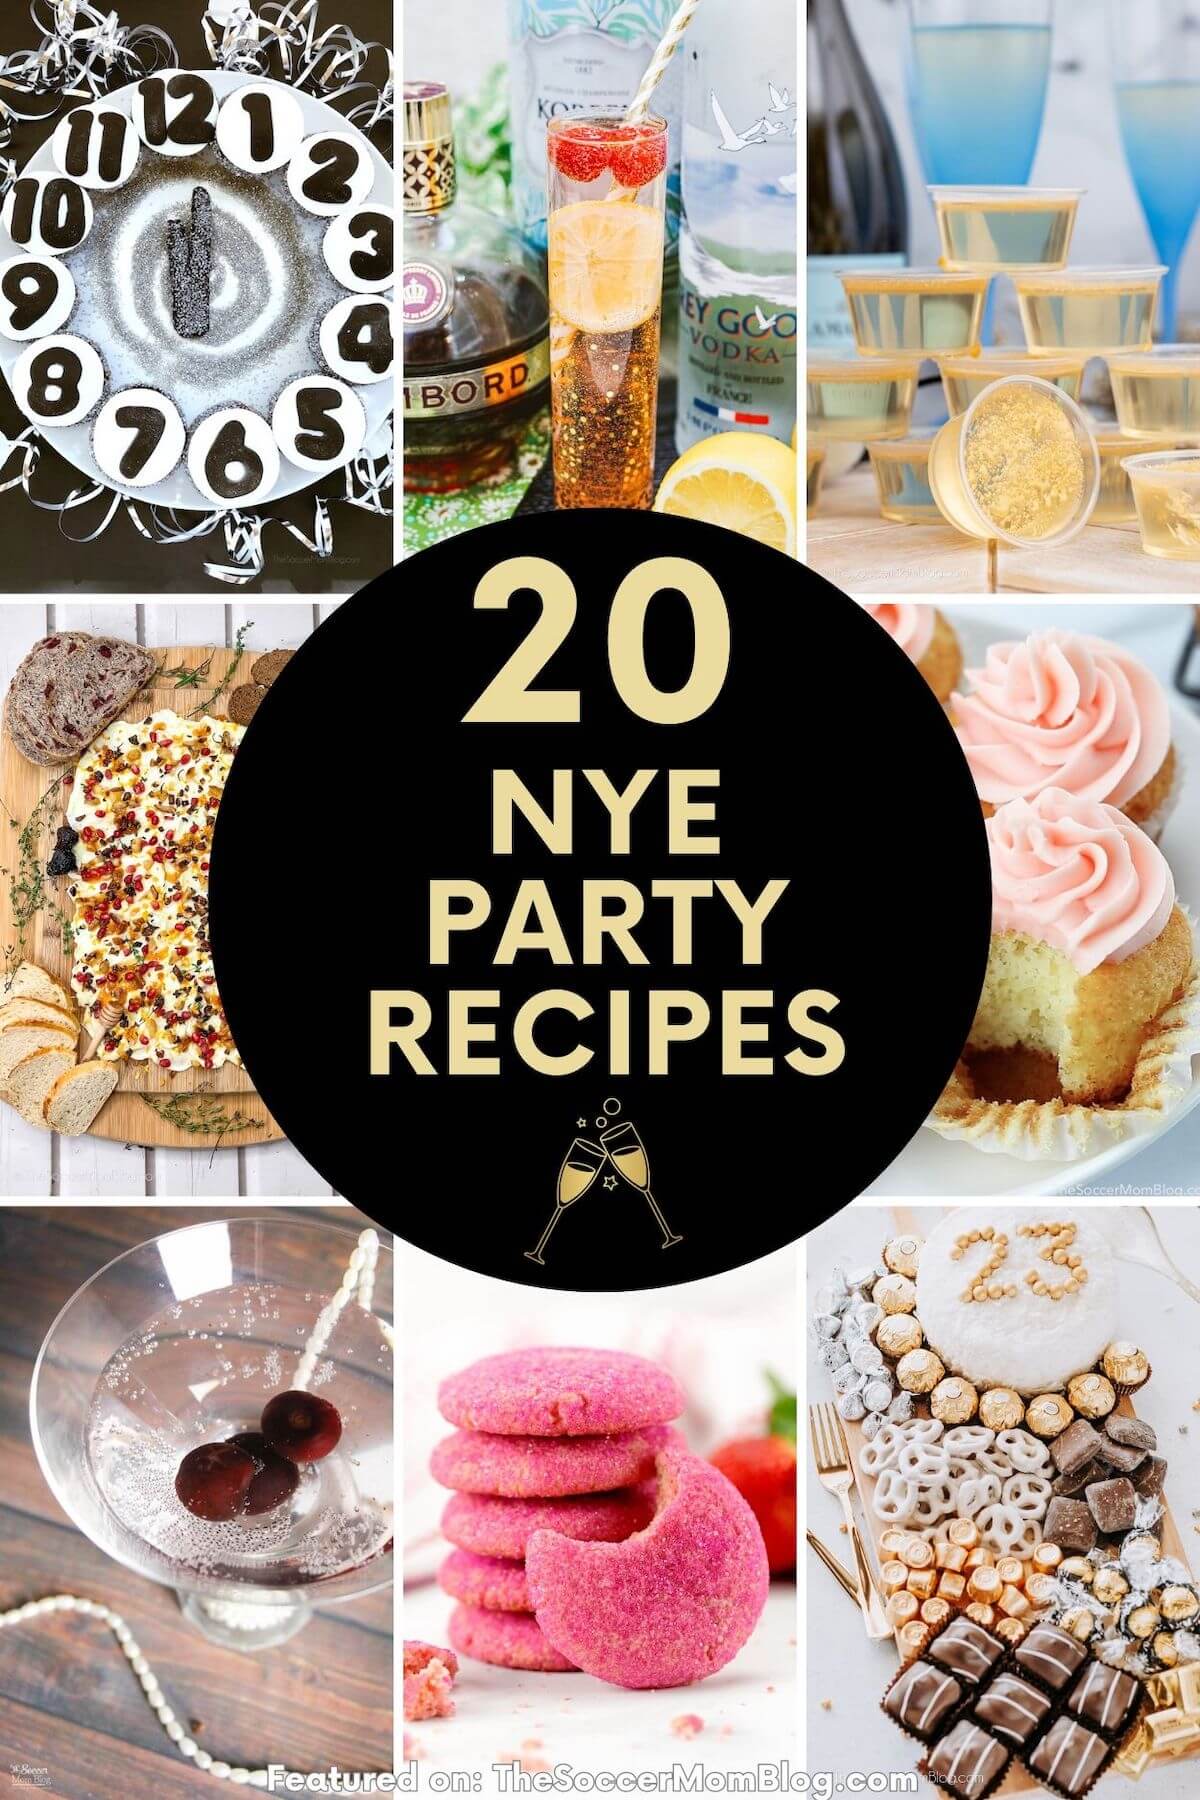 collage of festive foods for New Year's Eve, with text overlay "20 NYE Party Recipes".